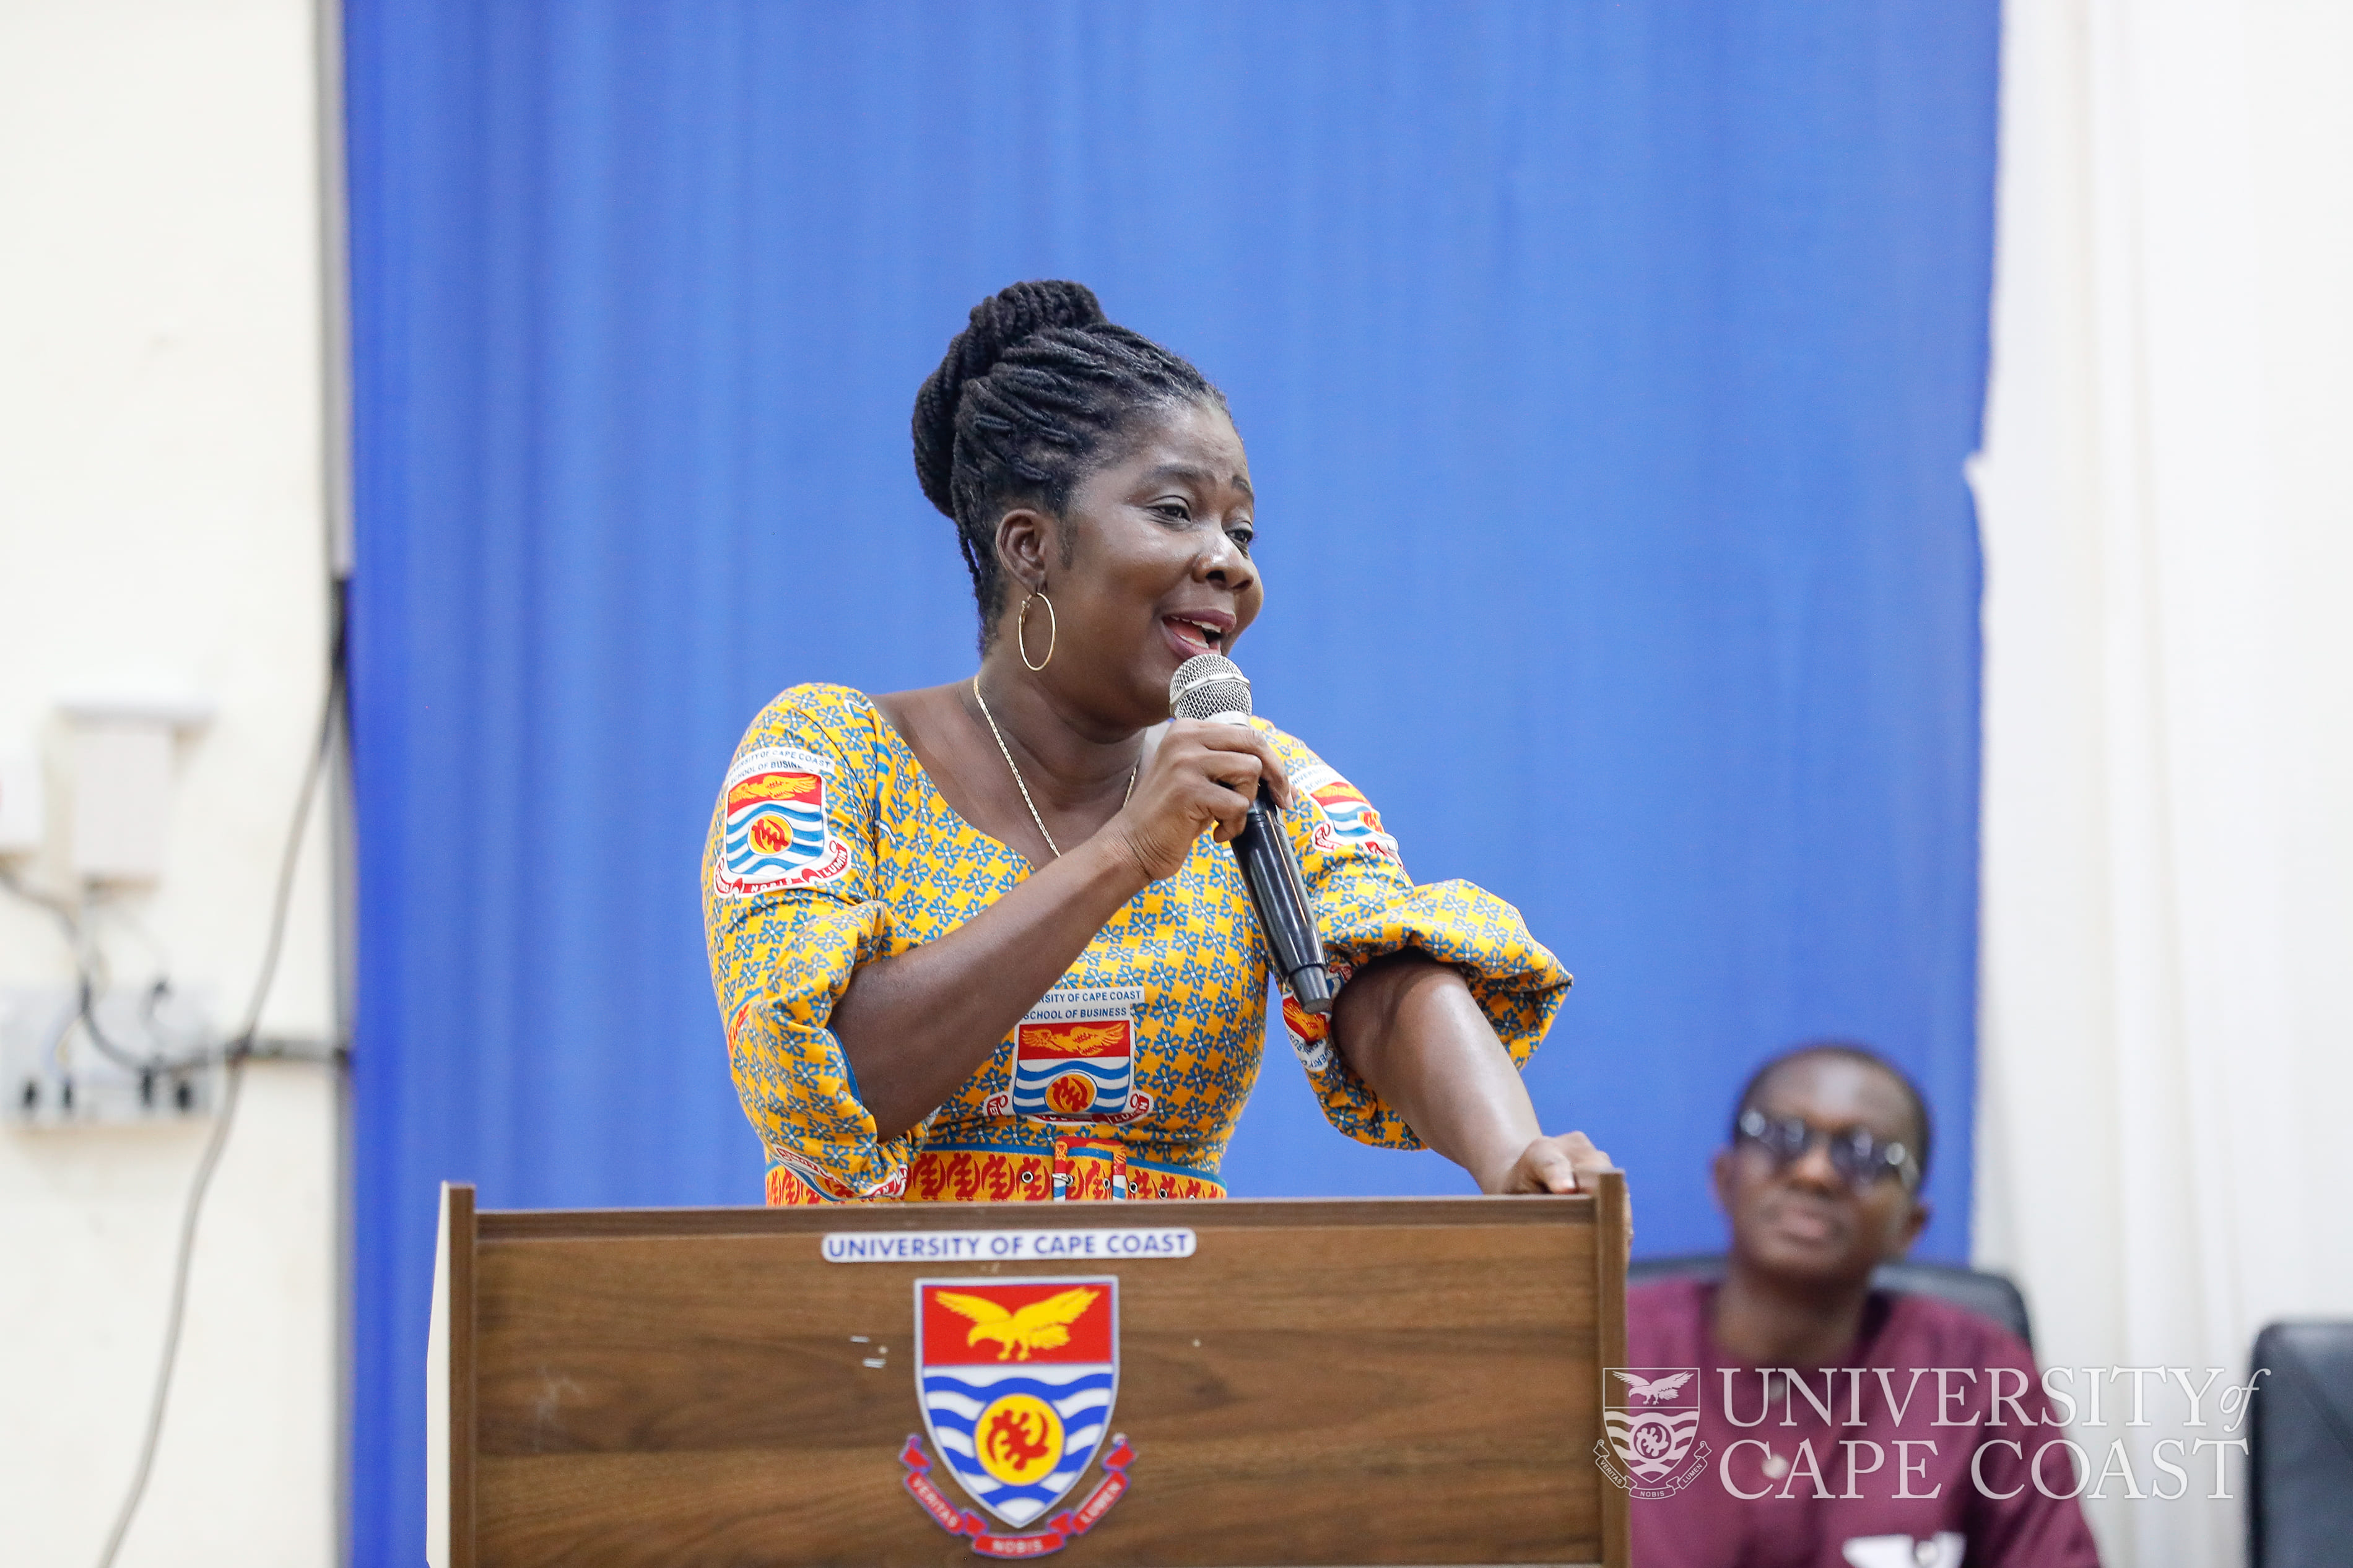  Greetings from Prof. (Mrs.) Rosemond Boohene, the Pro Vice-Chancellor, as she extends a warm welcome.